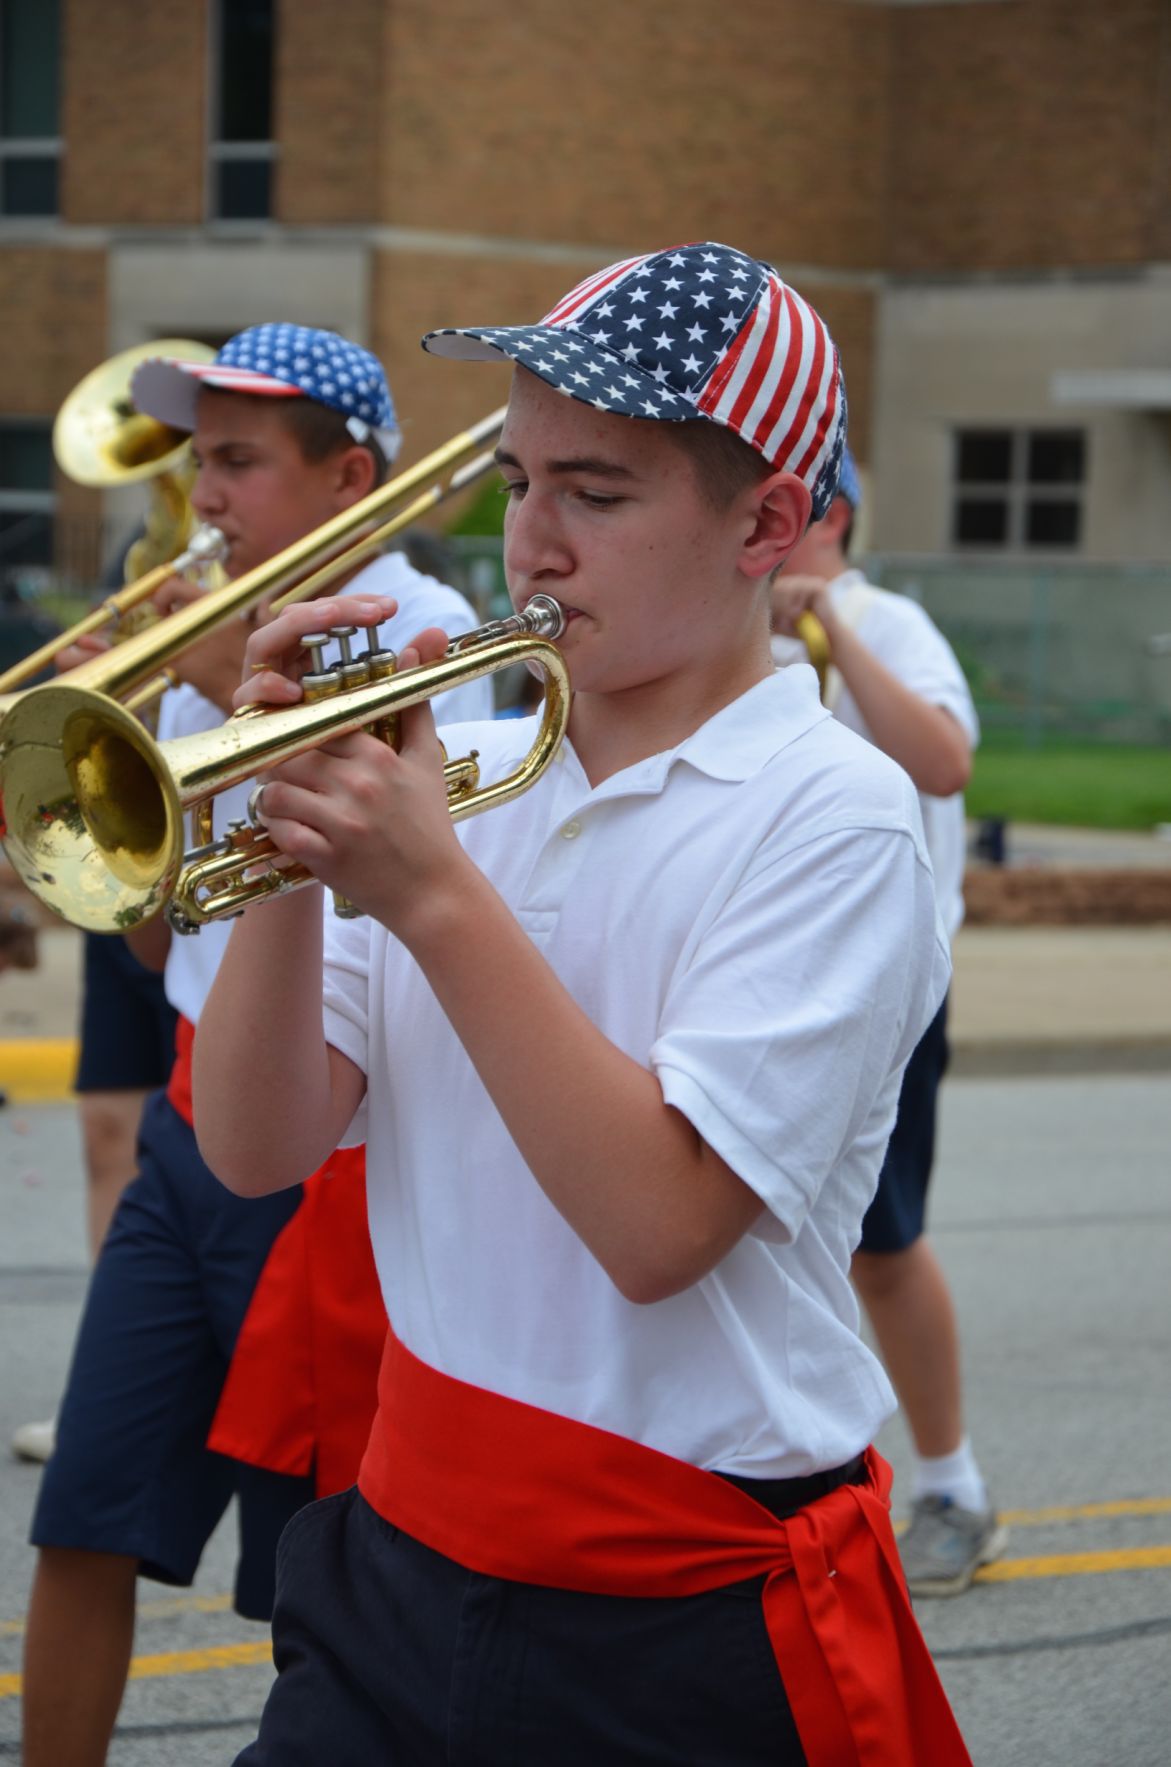 Faces of the Region Munster Fourth of July Parade Digital Exclusives